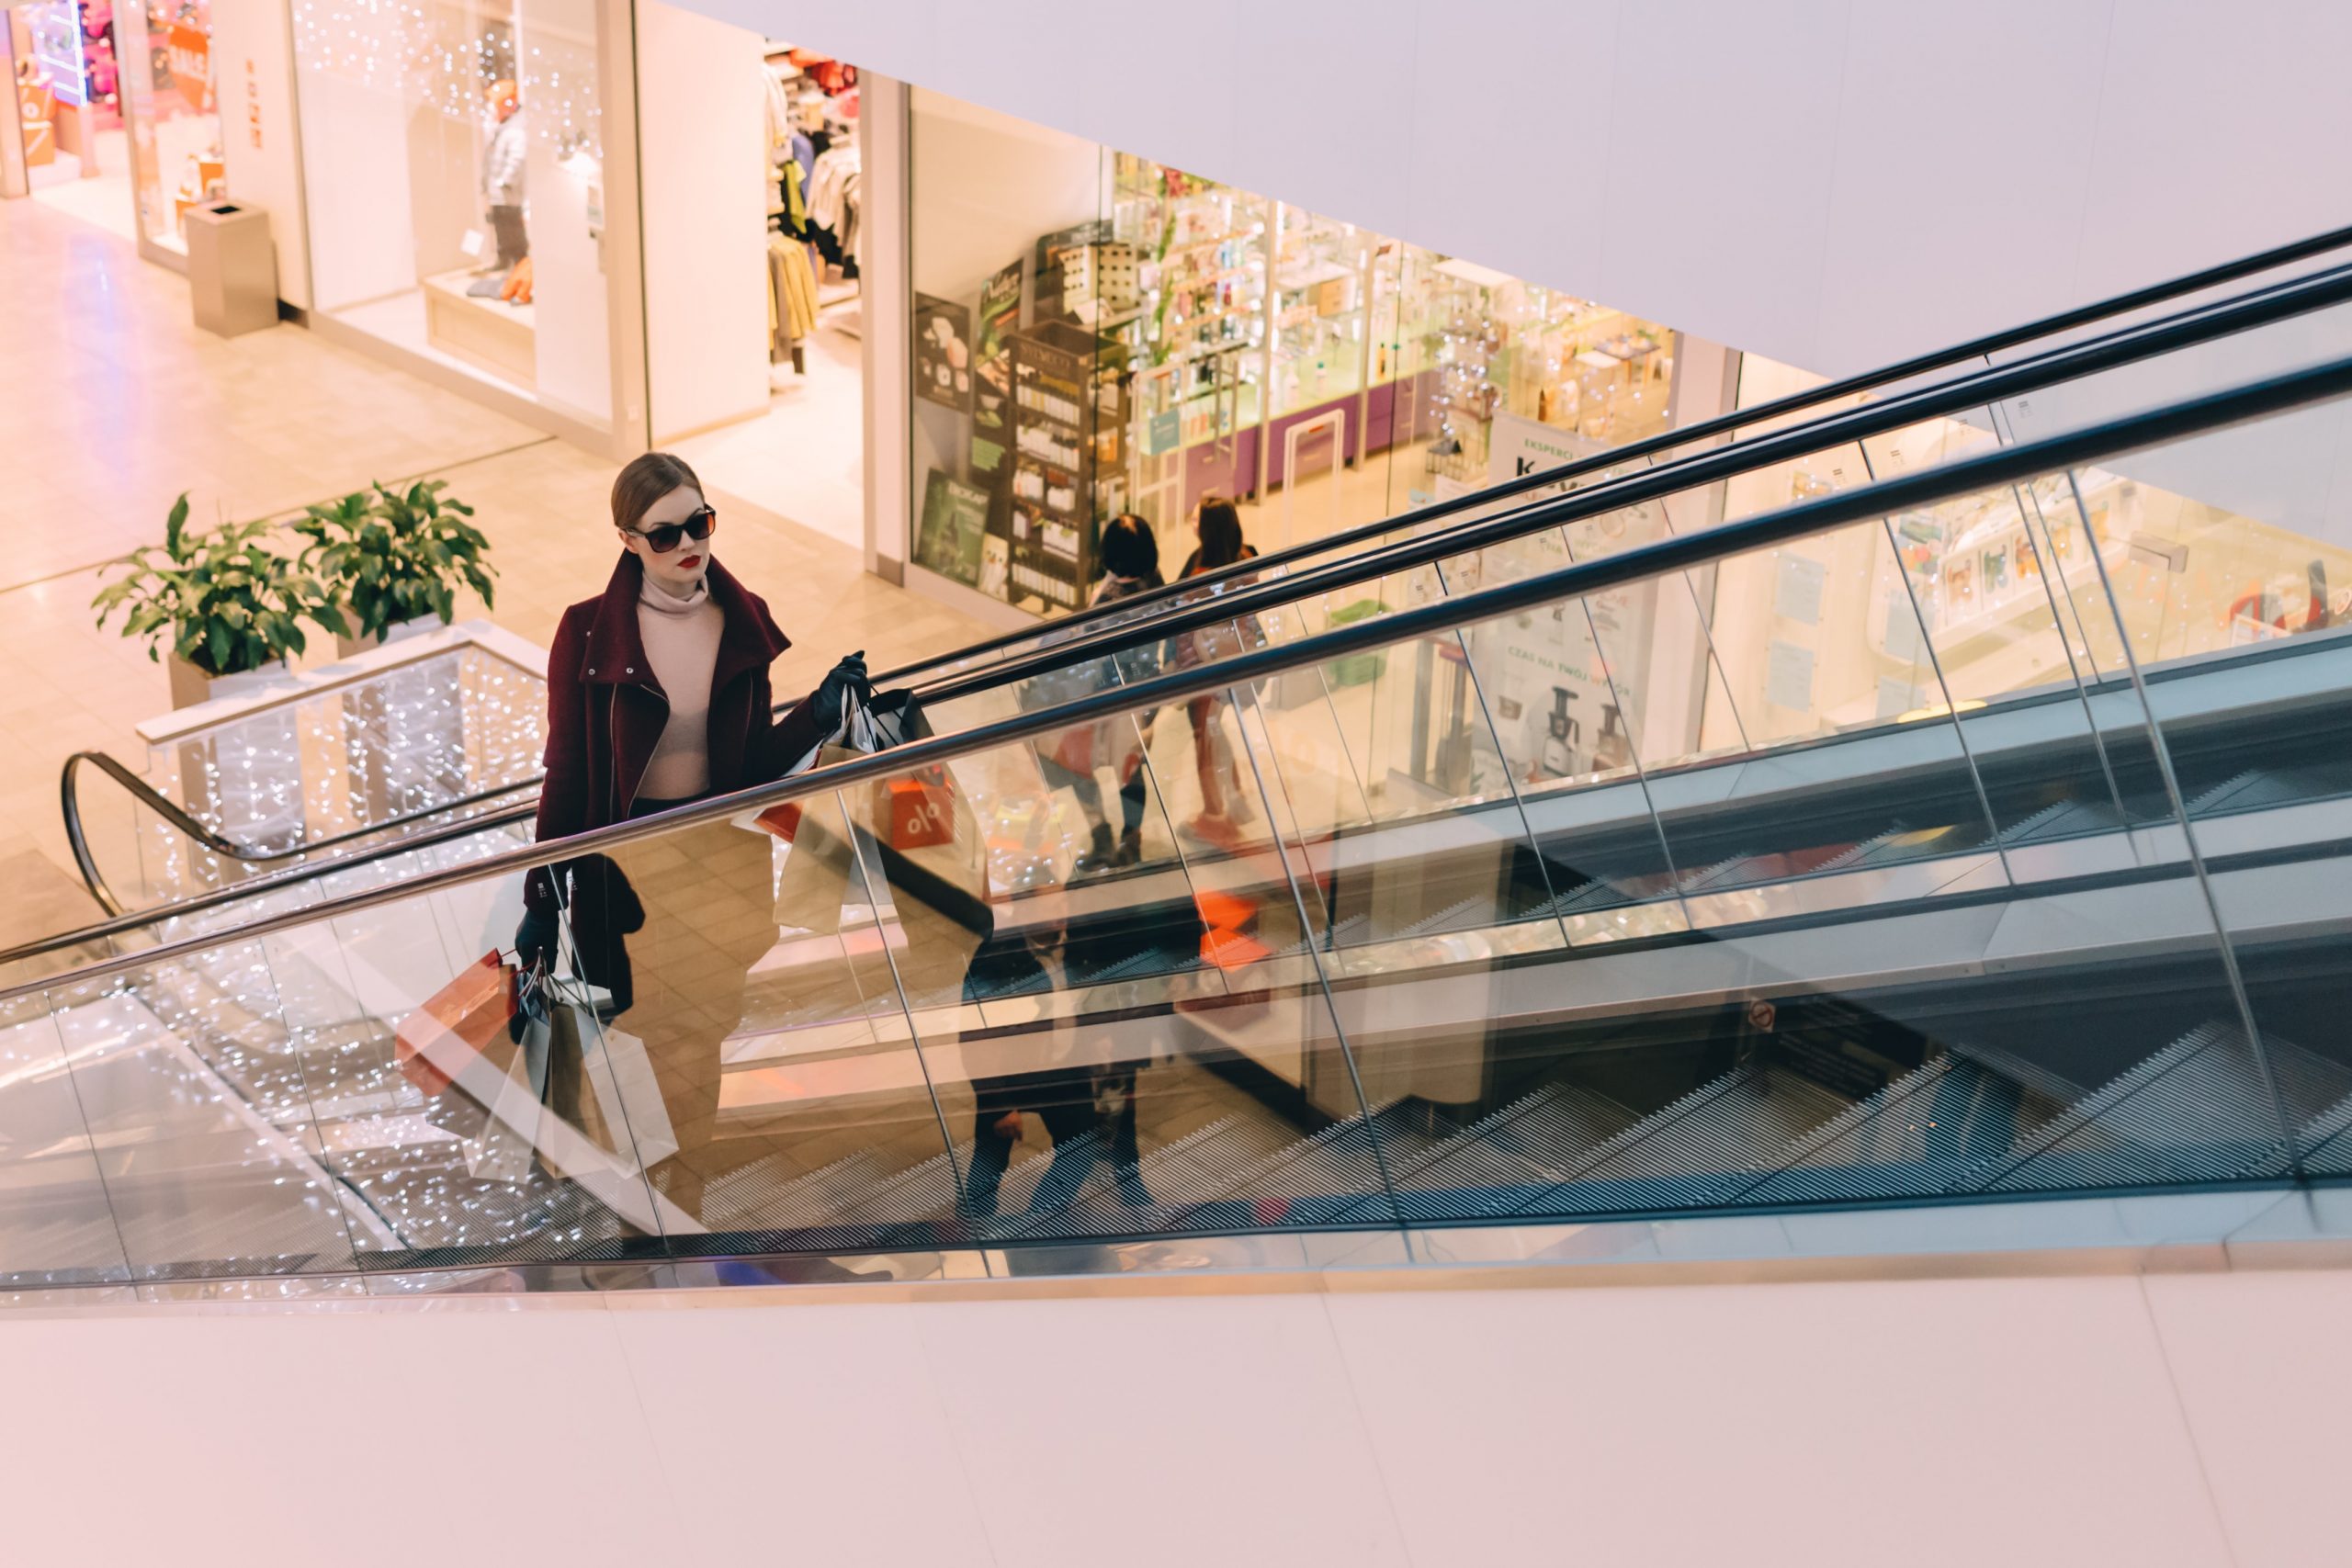 The sales associate claims that she was taught only 3 kinds of people visited luxury boutiques. Image credit: Photo by freestocks on Unsplash